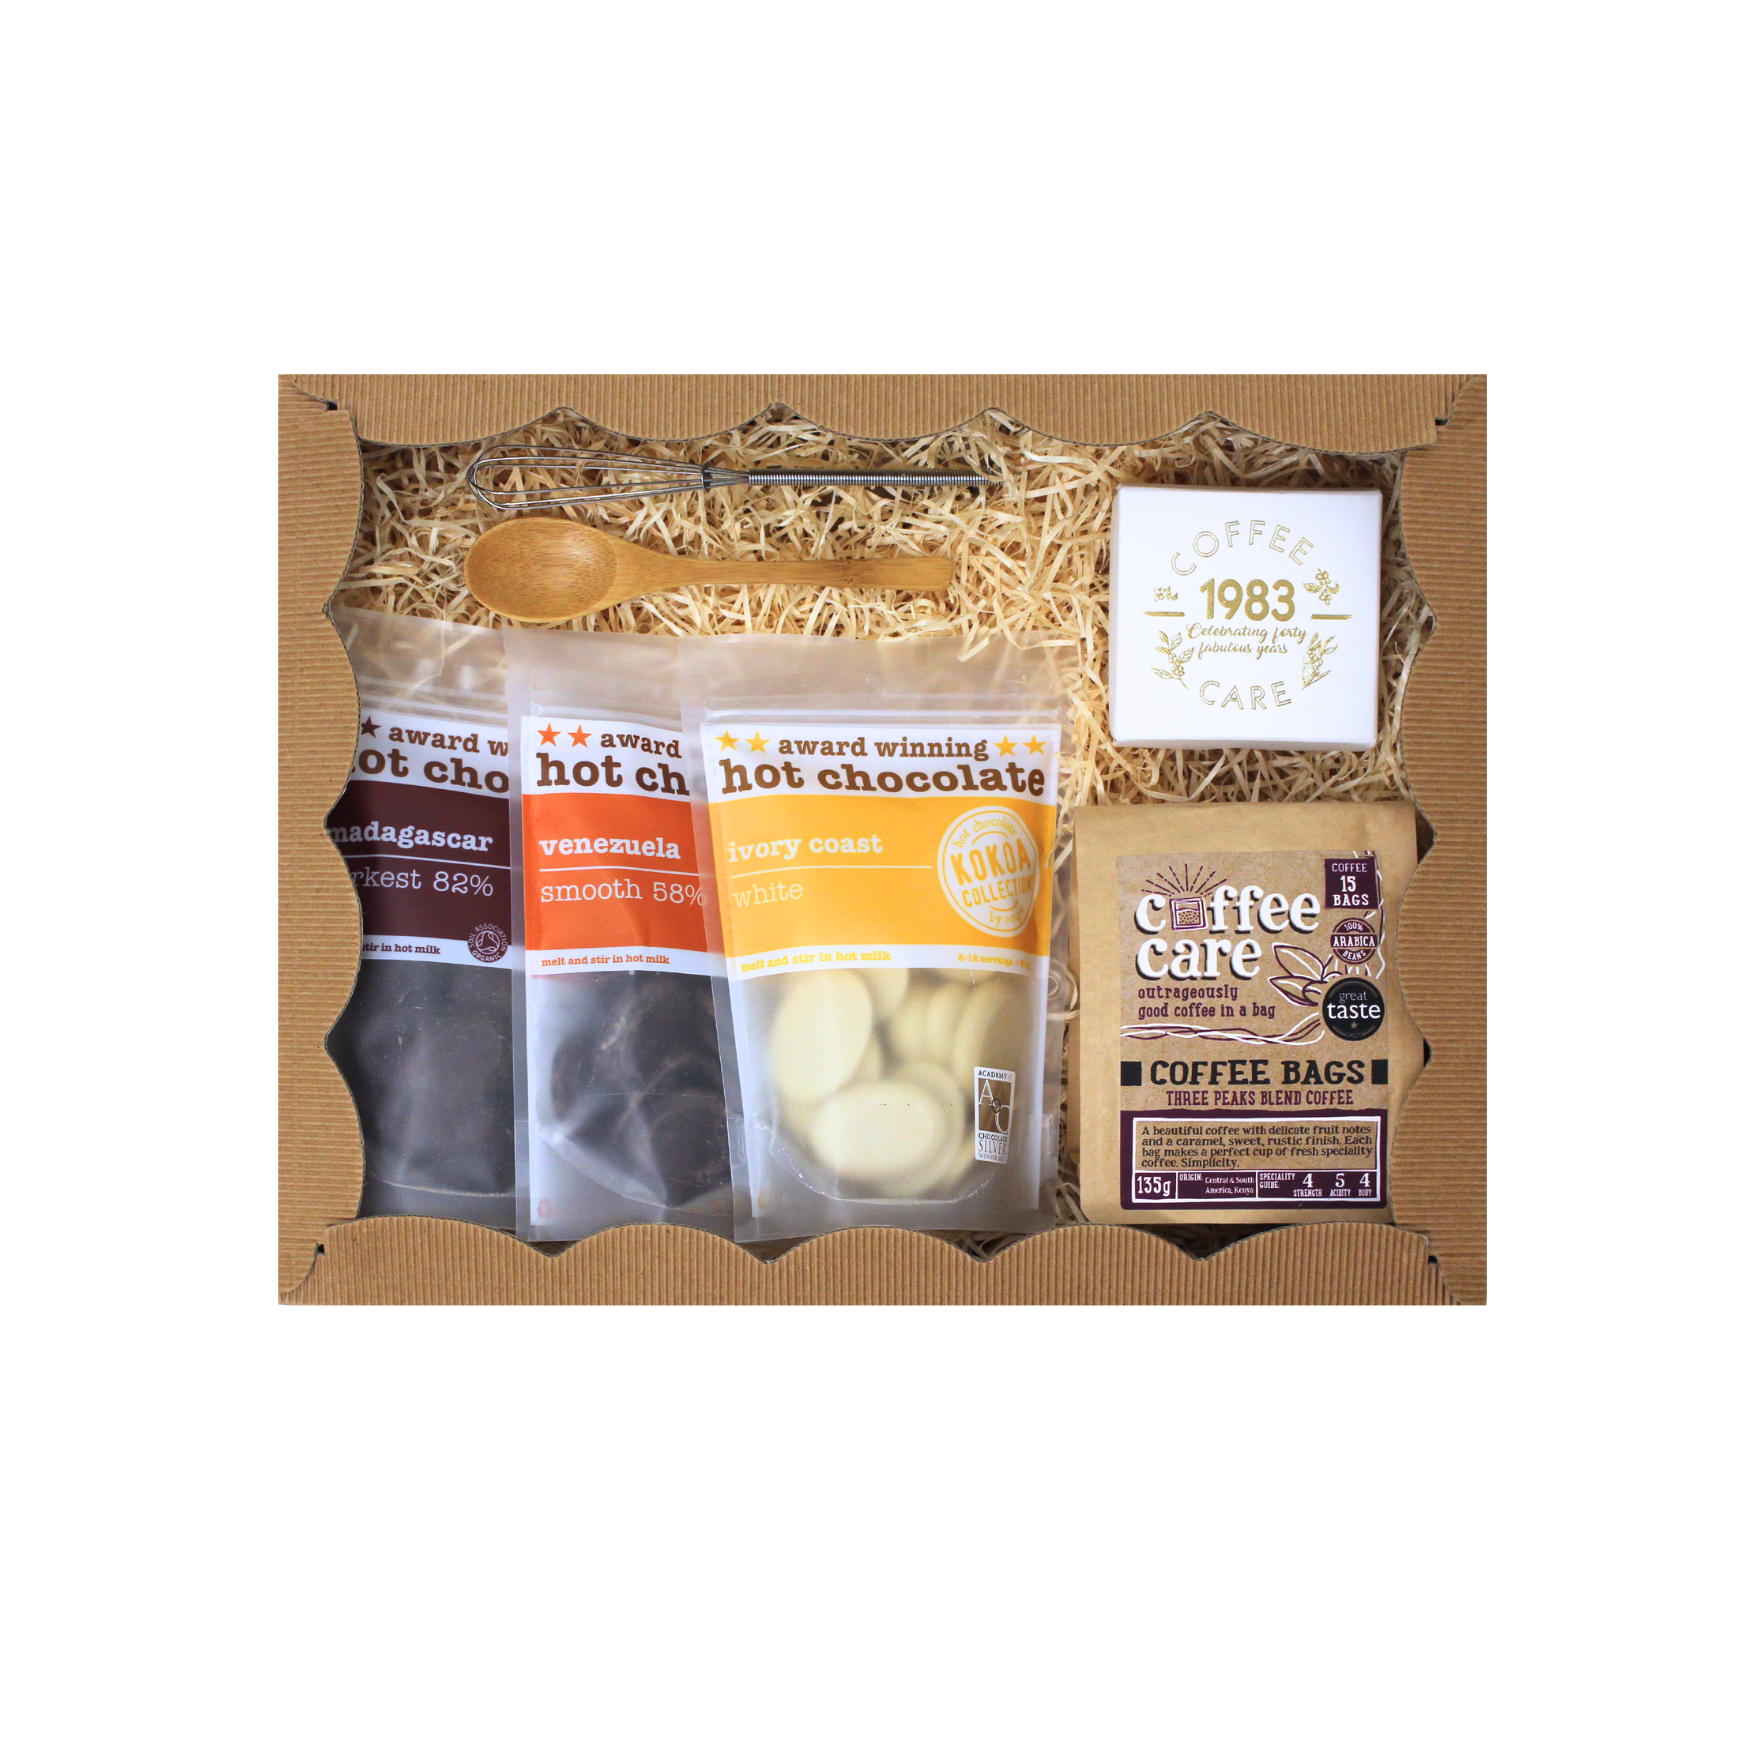 A hamper for the chocoholic and coffee lover. Coffee Bags, Kokoa Collection white, Venezuela, Madagascar, whitakers chocolate truffles, bamboo spoon and whisk